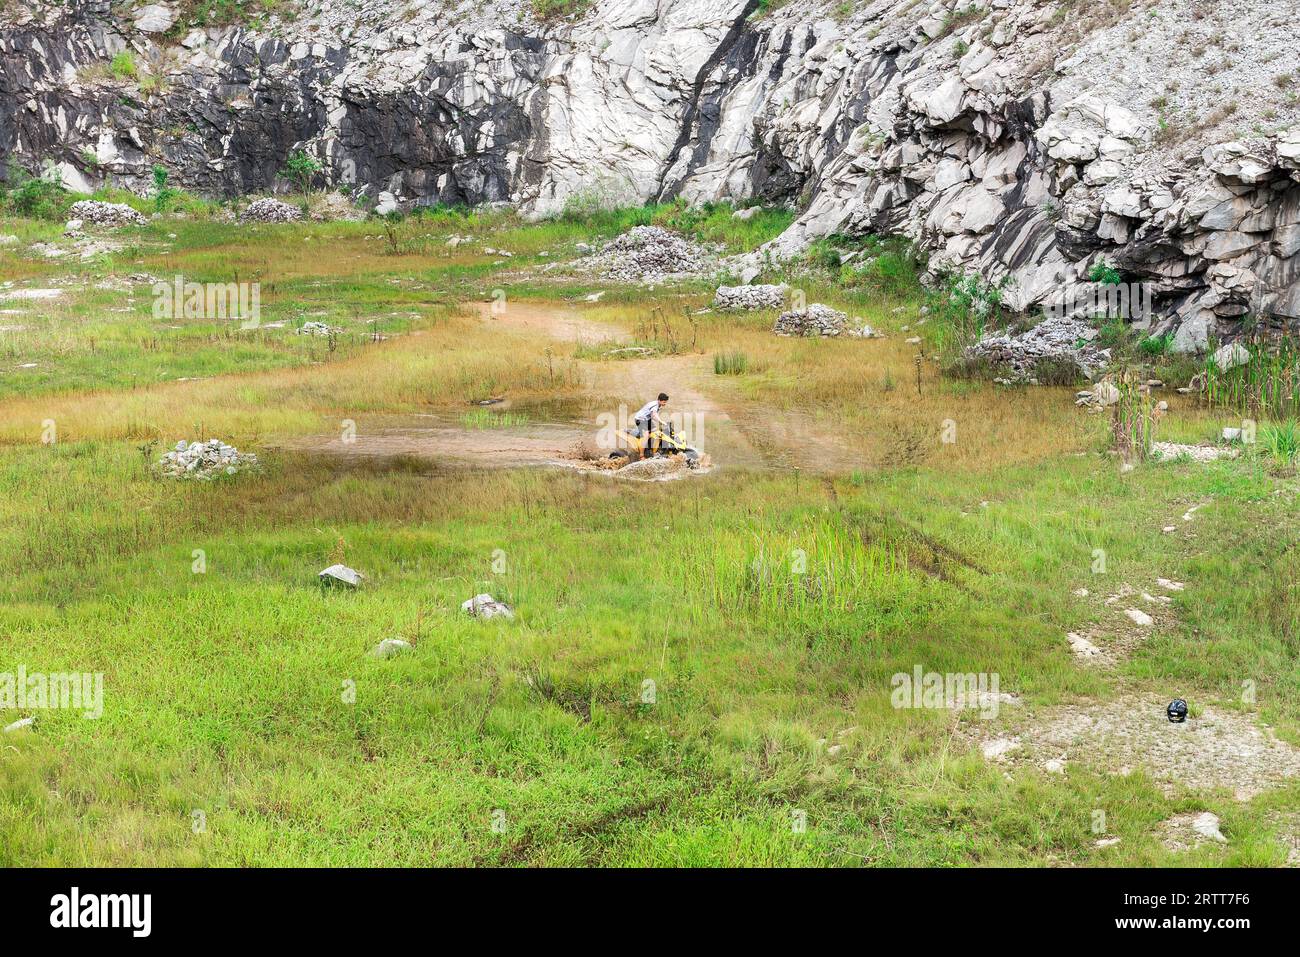 Minas Gerais, Brasil, Dec, 27, 2015: Man in nature go off road on a quad bike rally over mud puddle in countryside Stock Photo